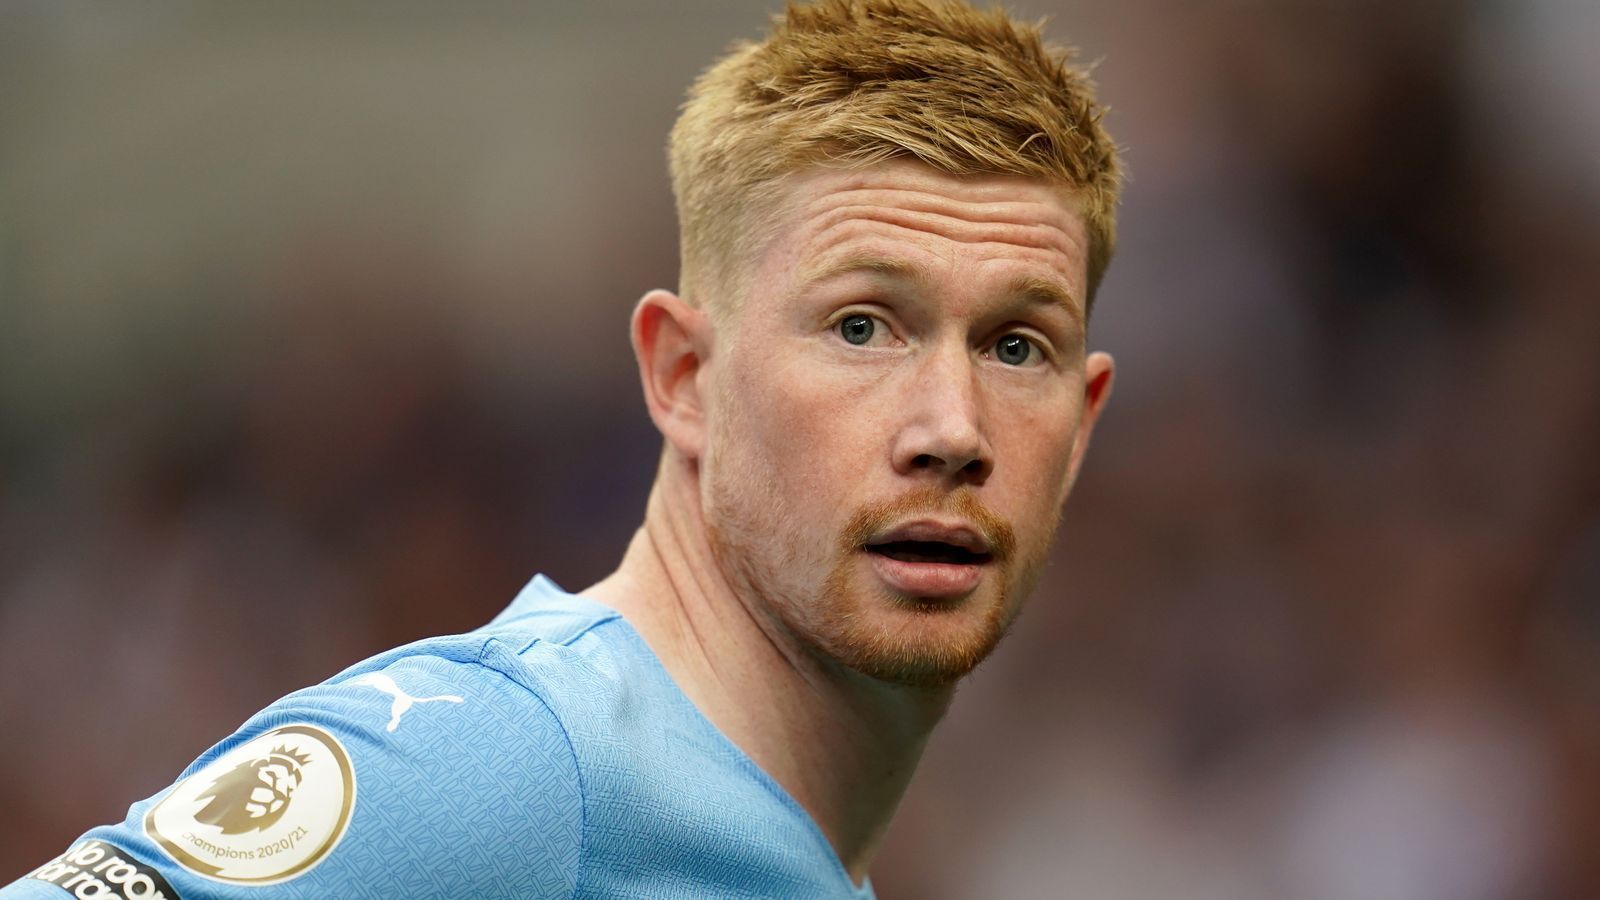 Kevin De Bruyne can play on the right flank, too